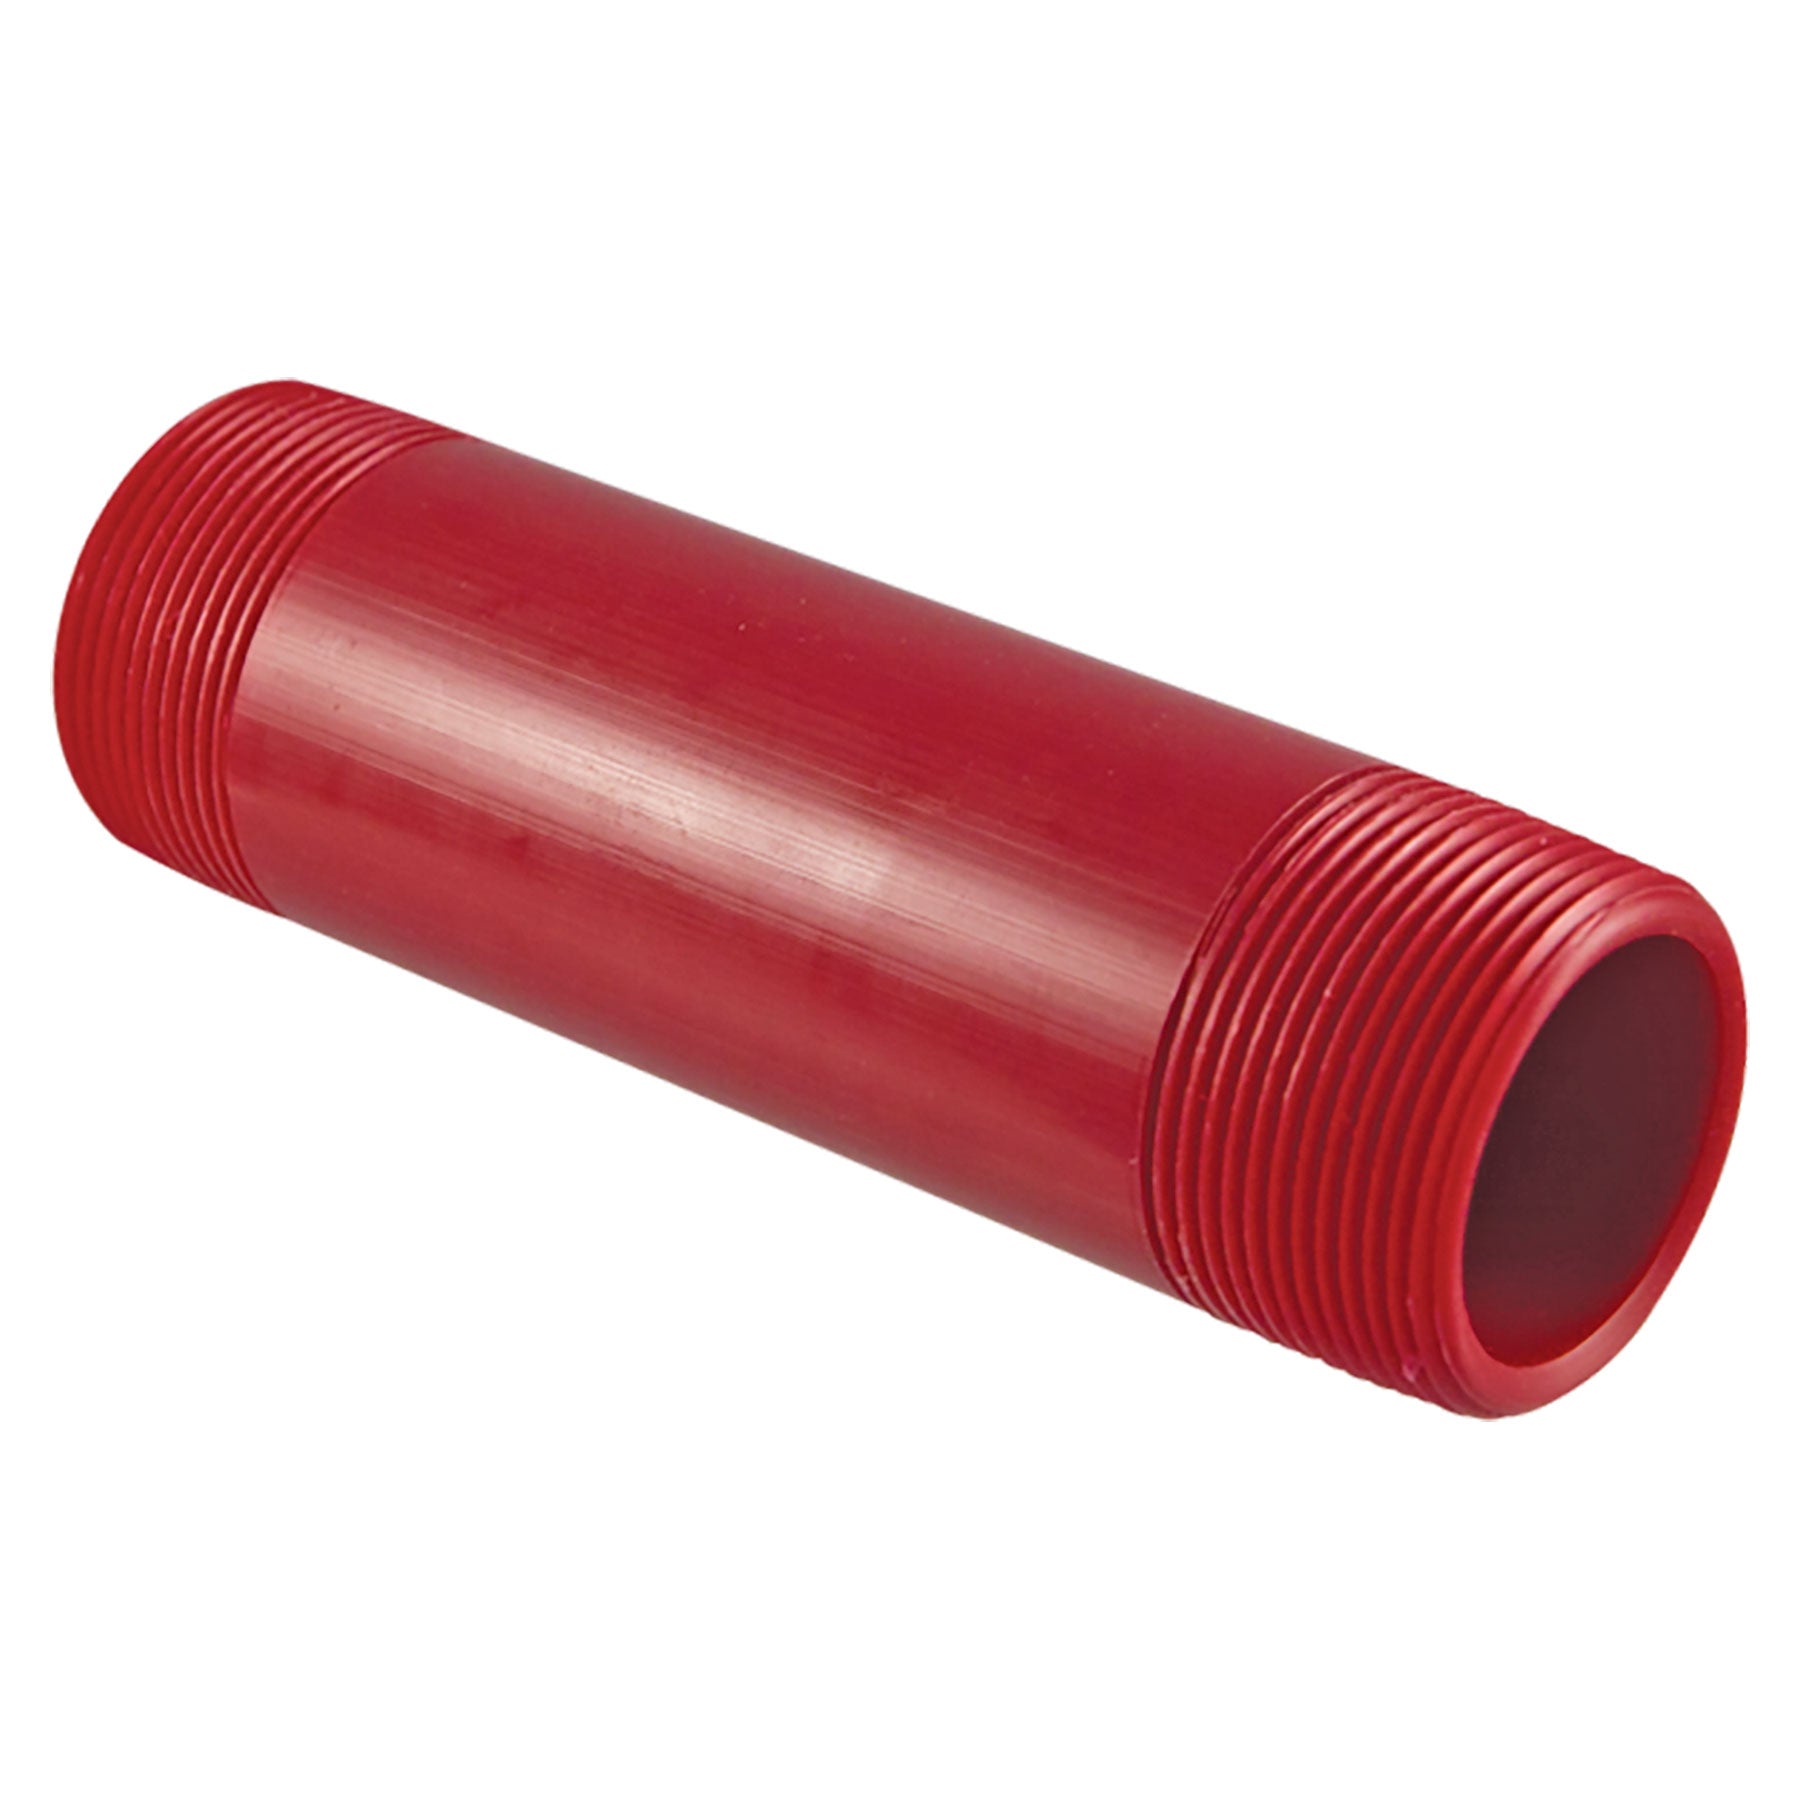 Red PVDF Schedule 80, Nipple, Threaded, 1/2 to Sizes, Close to  Lengths